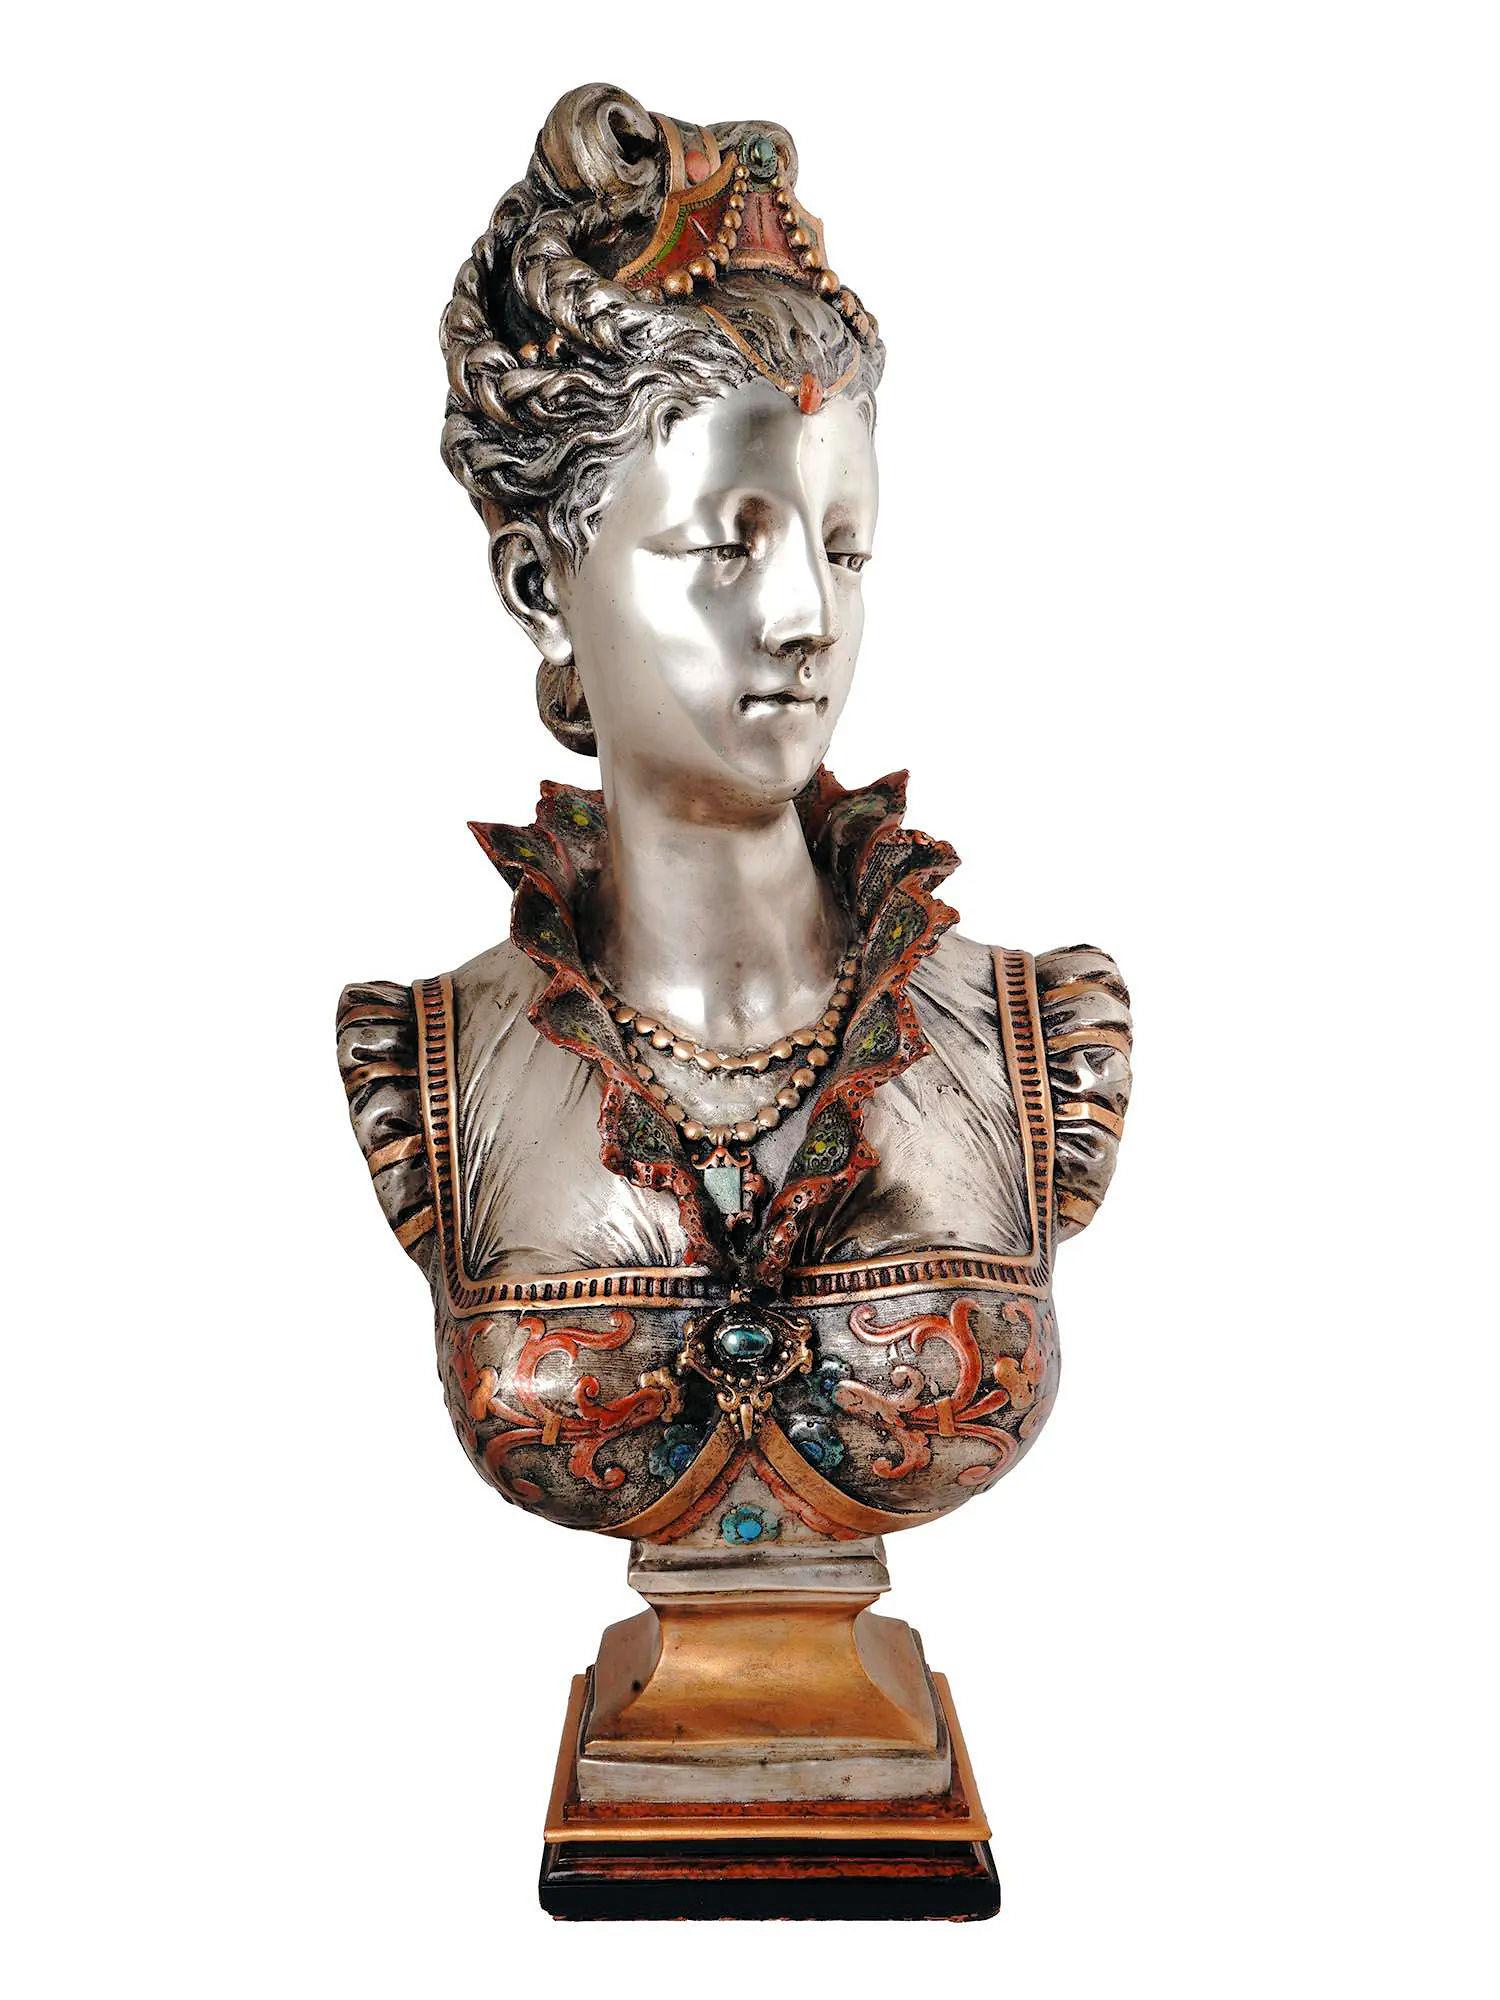 Silvered and Enameled Bronze Bust of Florentine Princess in Renaissance Style after the original model by Vincent Desire Faure de Brousse, Cast circa 1940s.